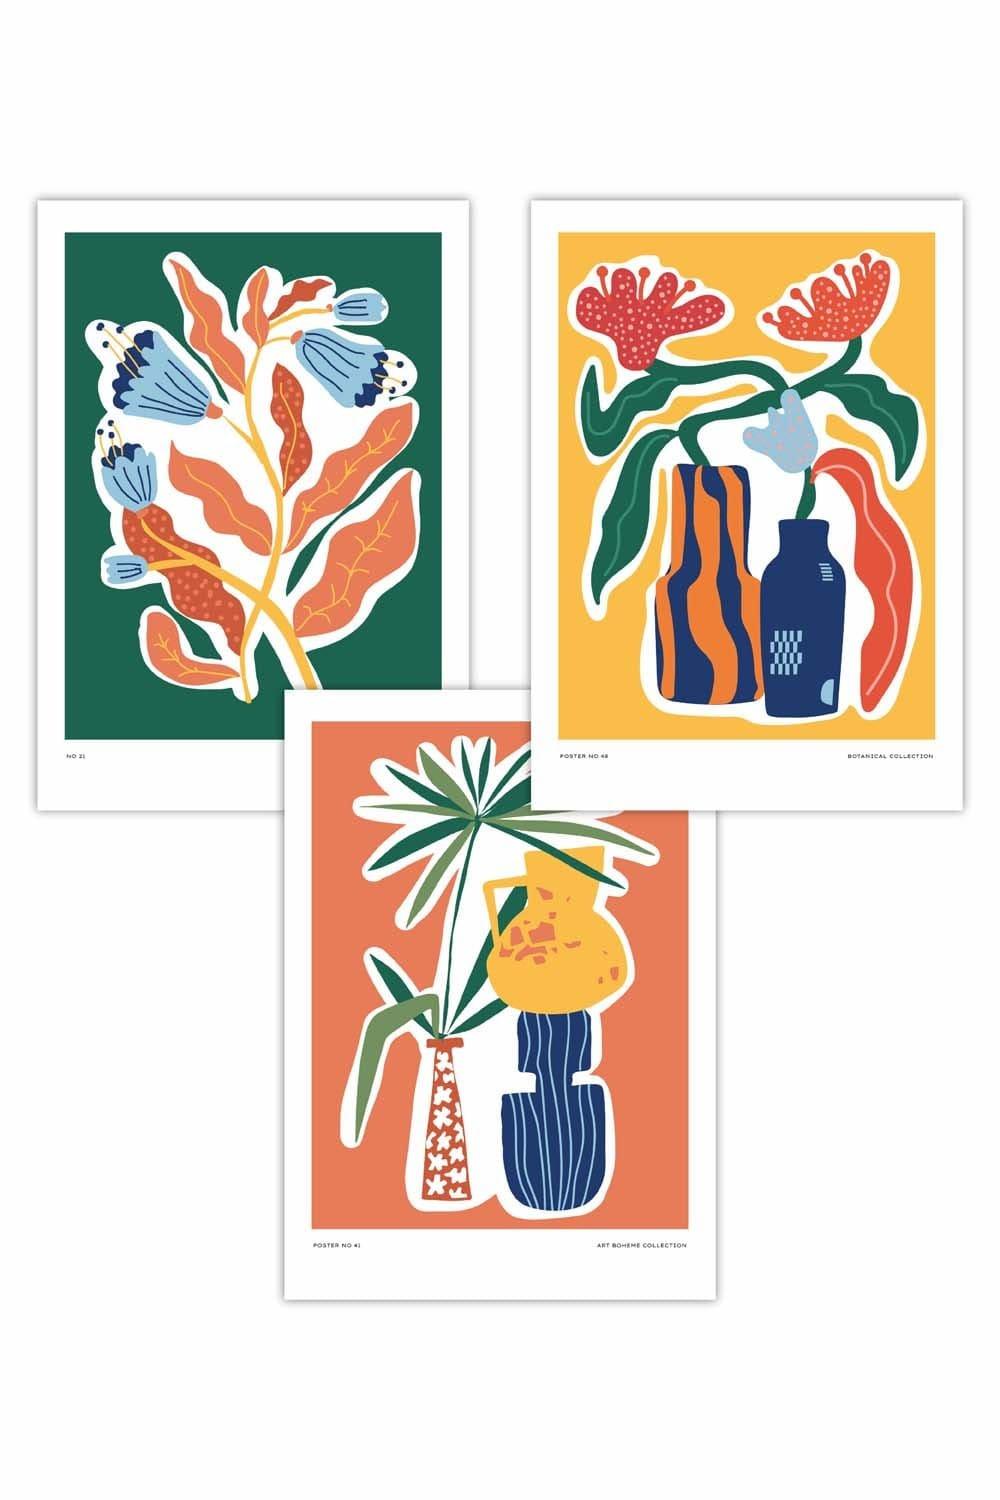 Set of 3 Artisan Flower Market in Green, Yellow and Orange Art Posters